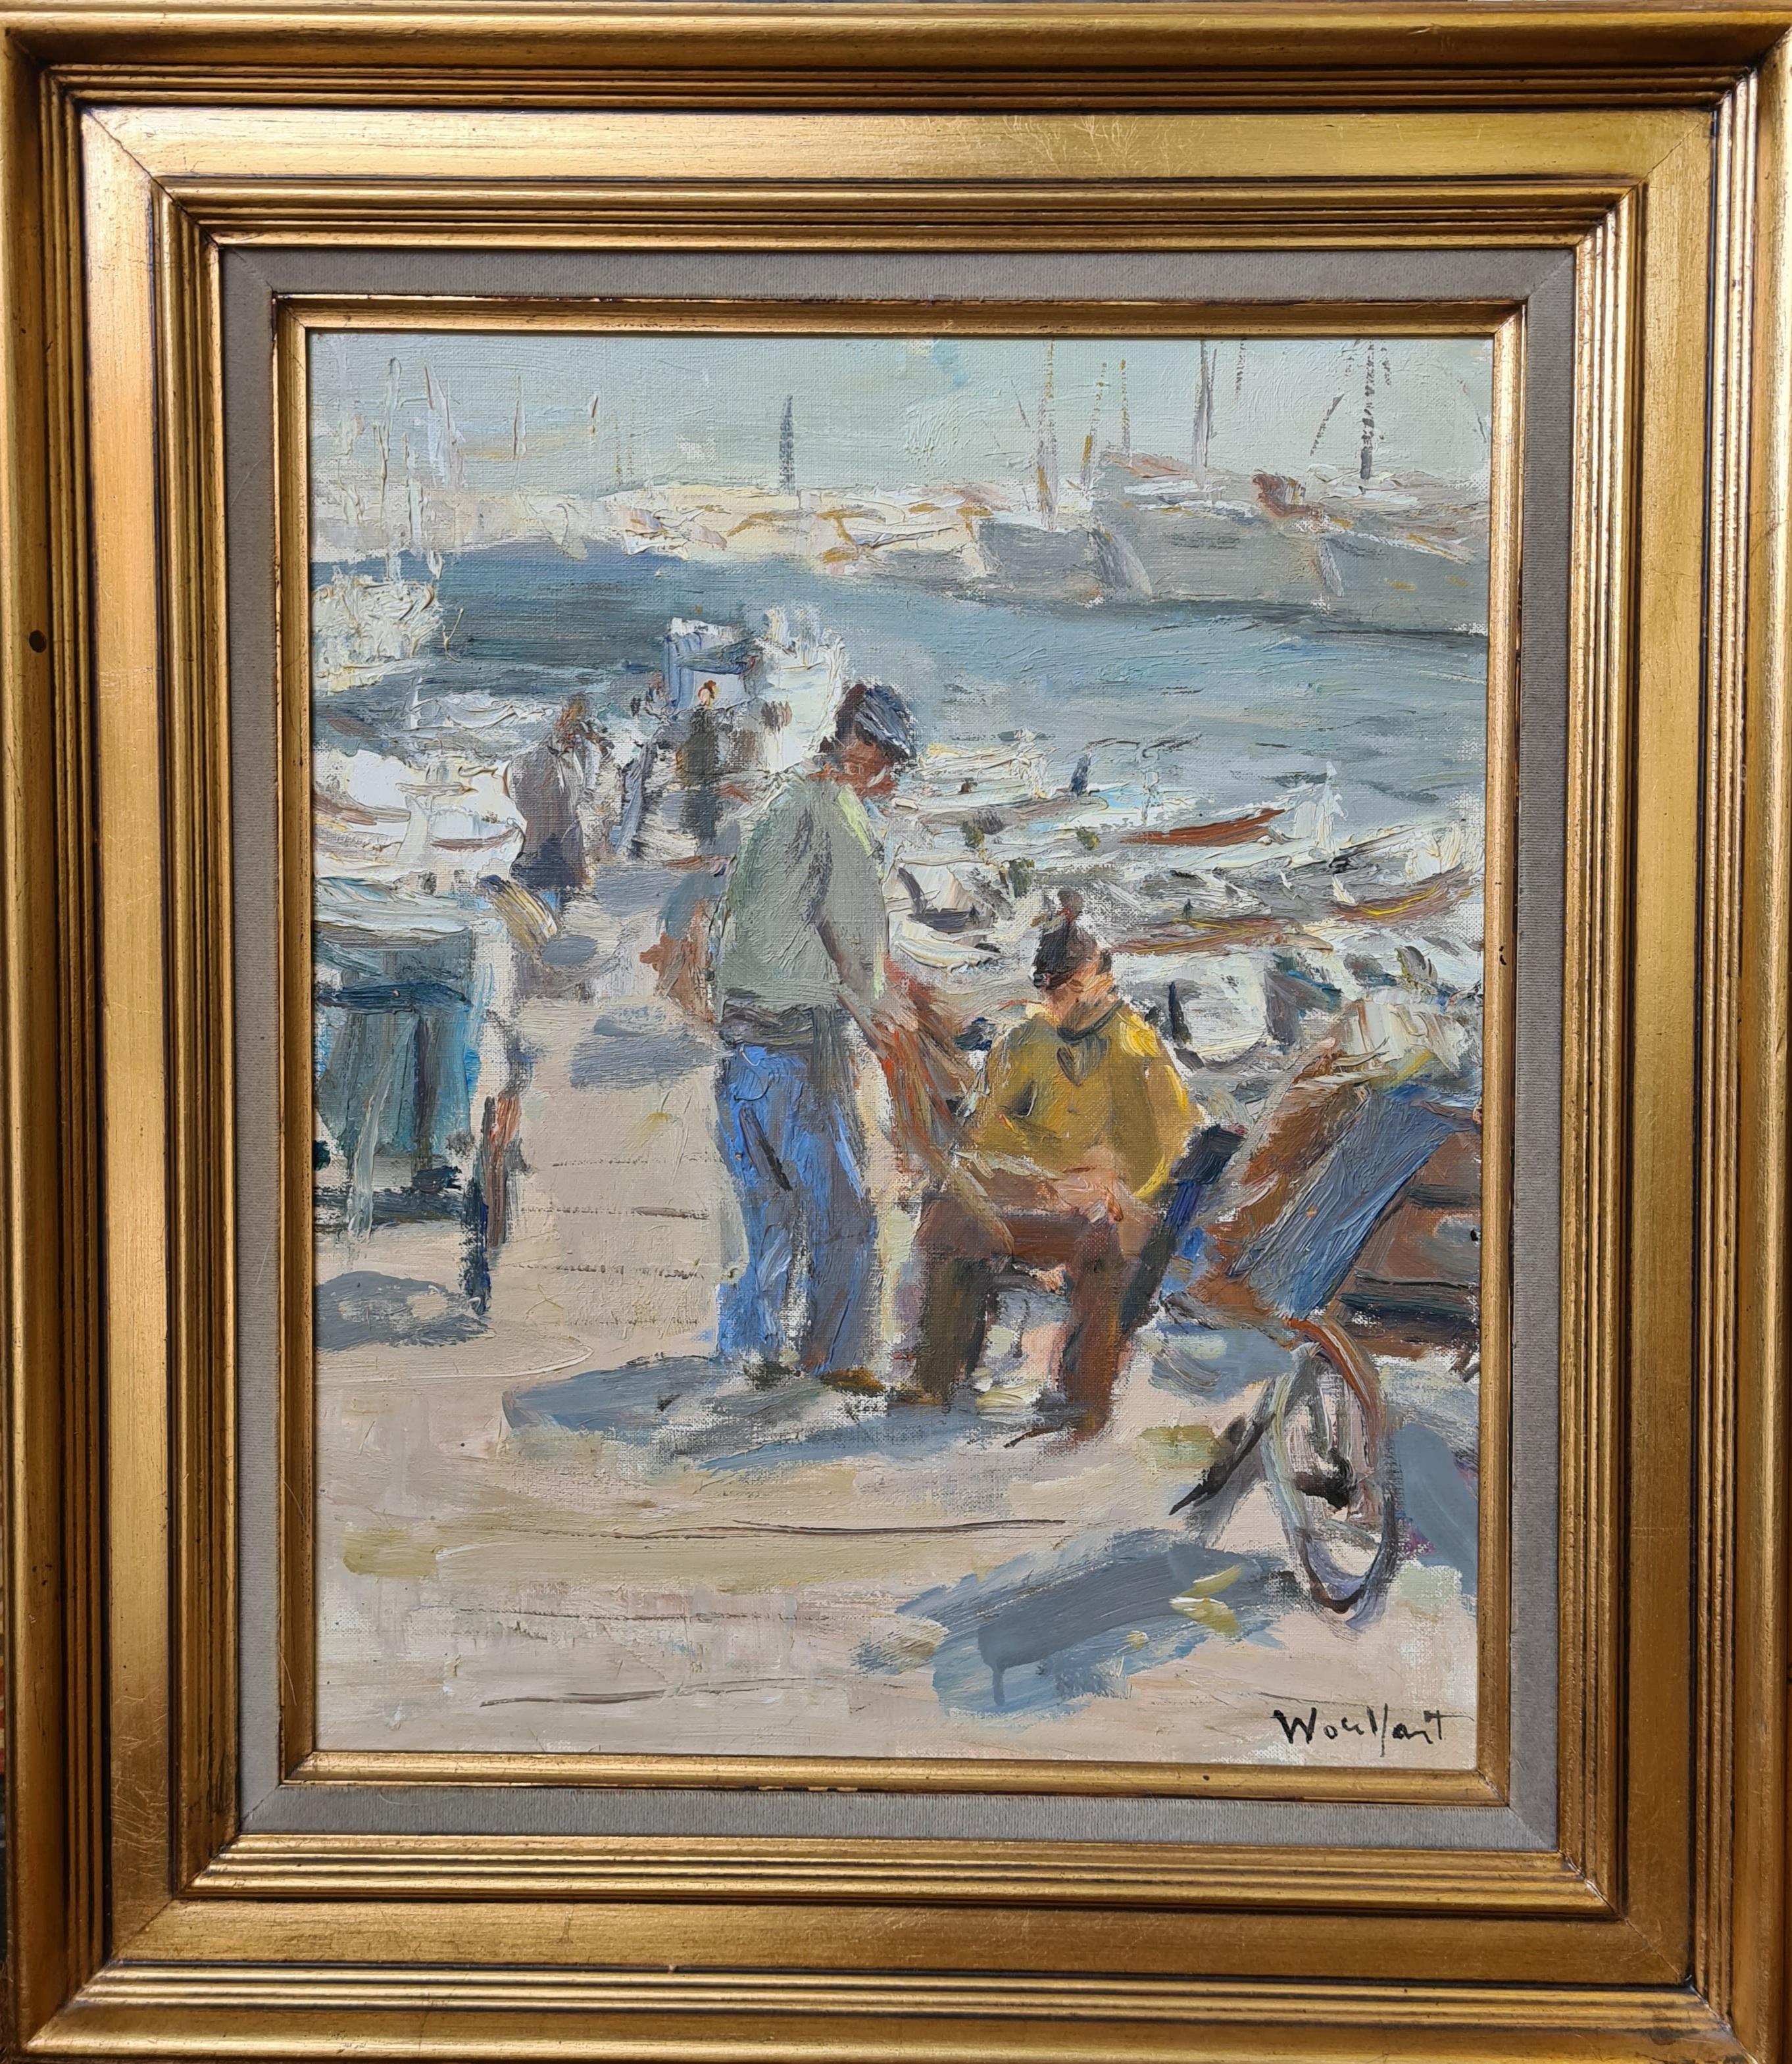 Fishermen in the Port of Cannes, mid 20th Century Oil on Canvas. - Painting by Marius Woulfart